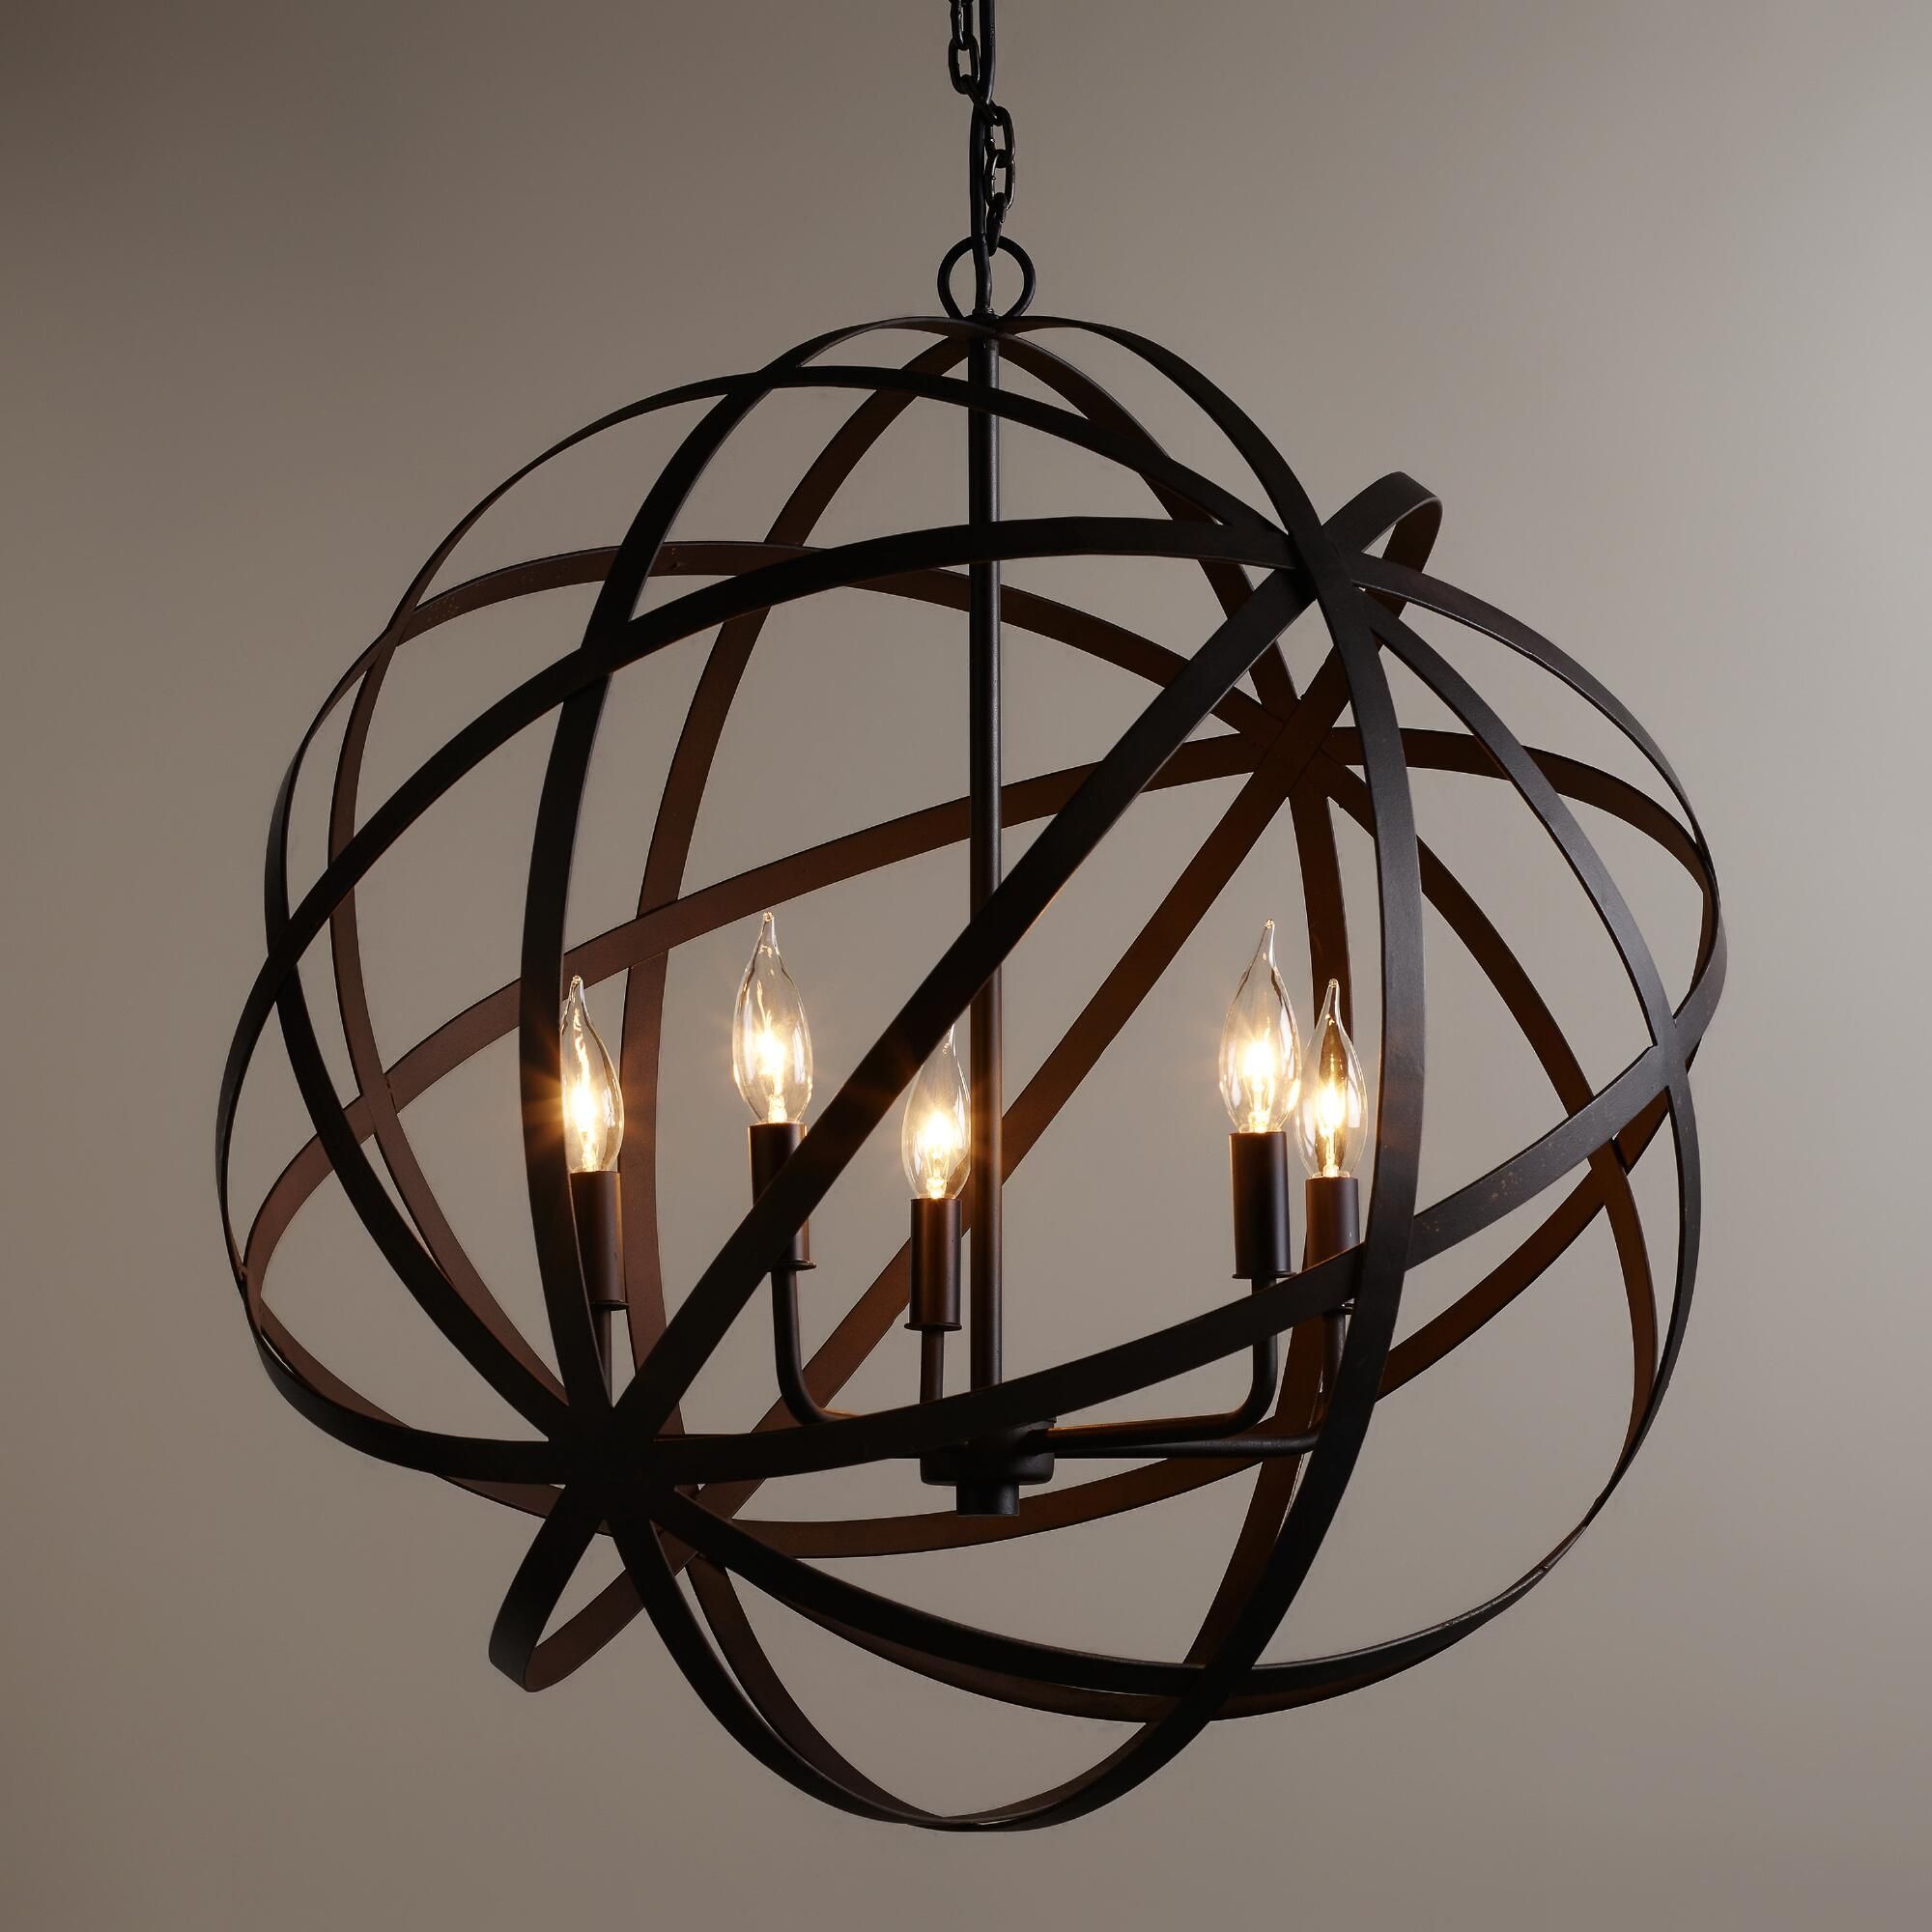 Elegant Metal Chandelier On Inspiration To Remodel Home With Metal In Metal Chandeliers (View 8 of 12)